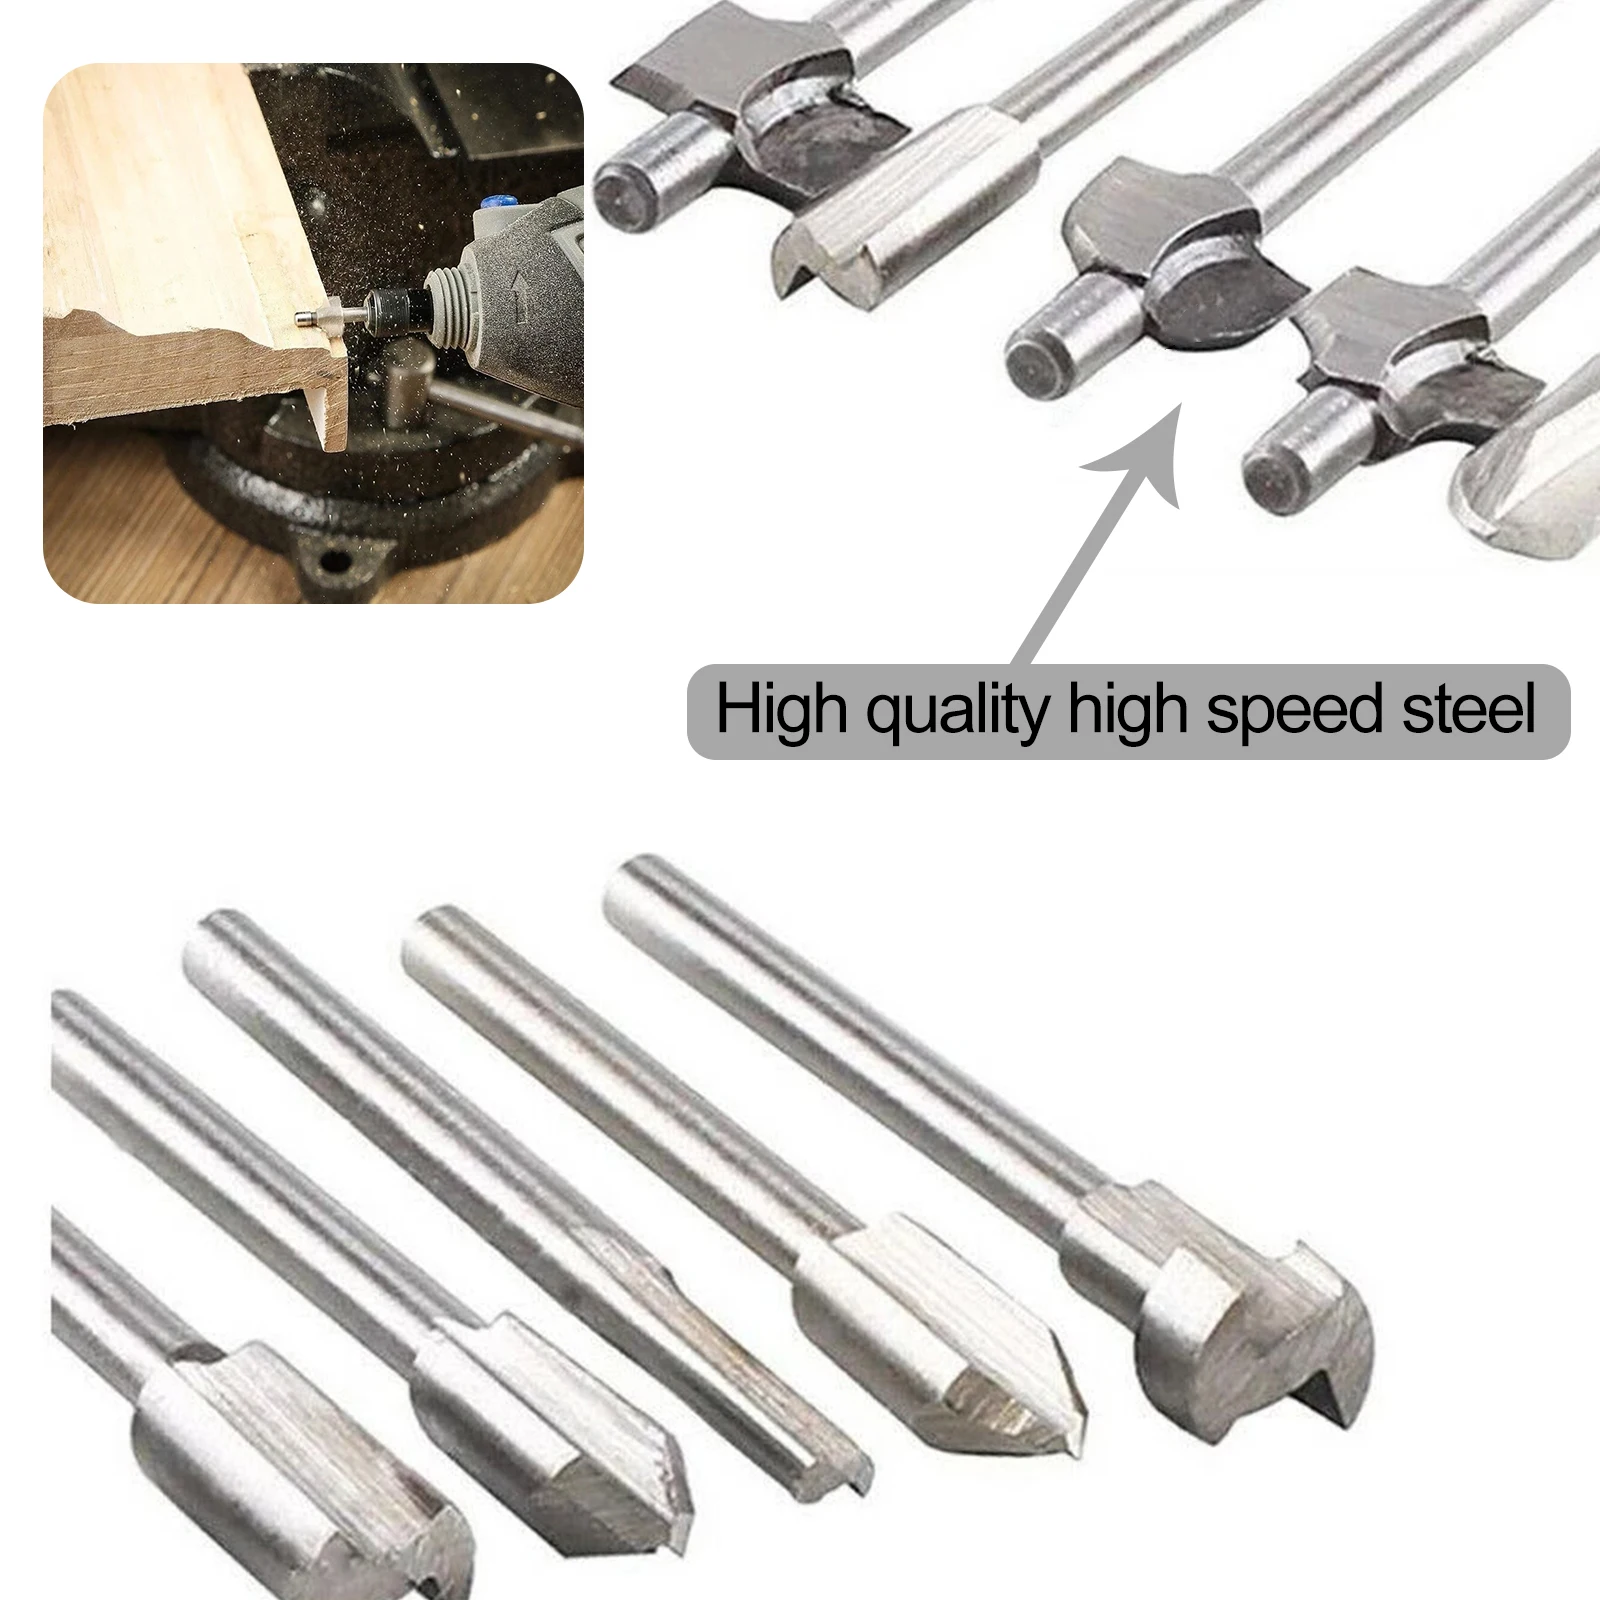 10pcs 3.2mm Routing Router Drill Bits Set Wood Stone Metal Root Carving Milling Cutter For Dremel Rotary Tool mini seal stamp stone carving tool chisels knife set 15pcs chinese seal stamp stone wood seal bed stamp carved bed